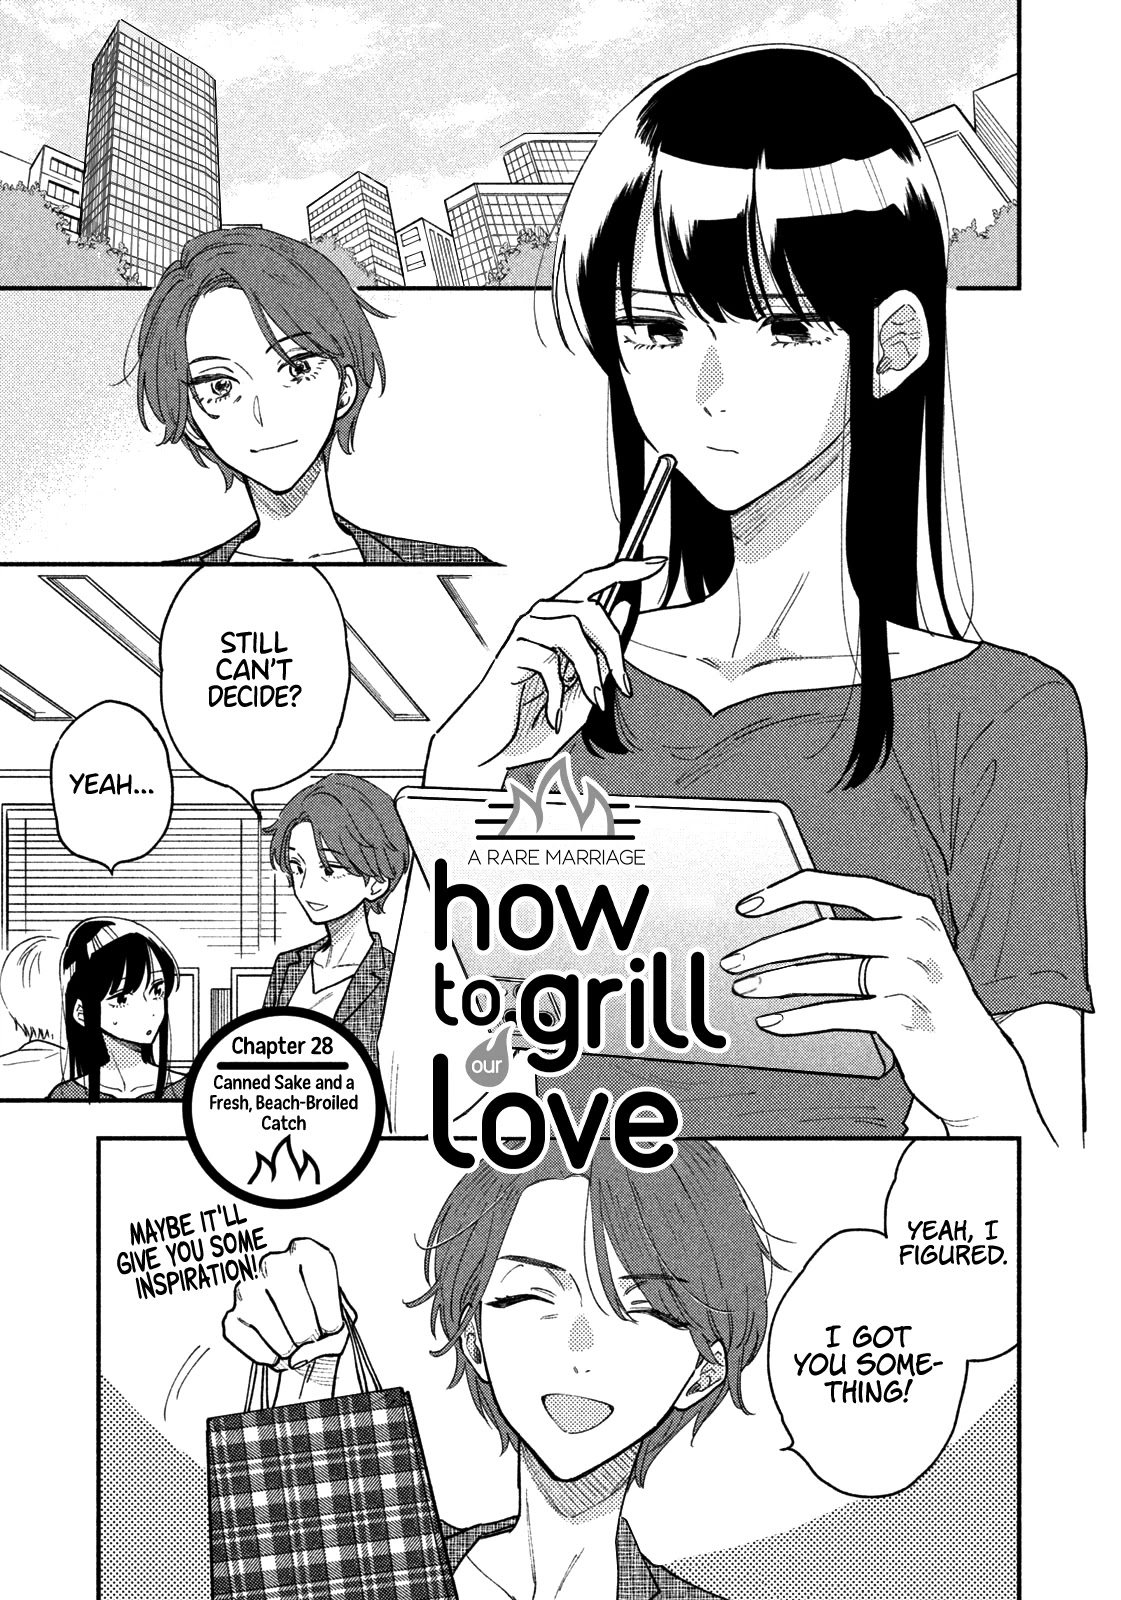 A Rare Marriage: How To Grill Our Love Chapter 28 #2